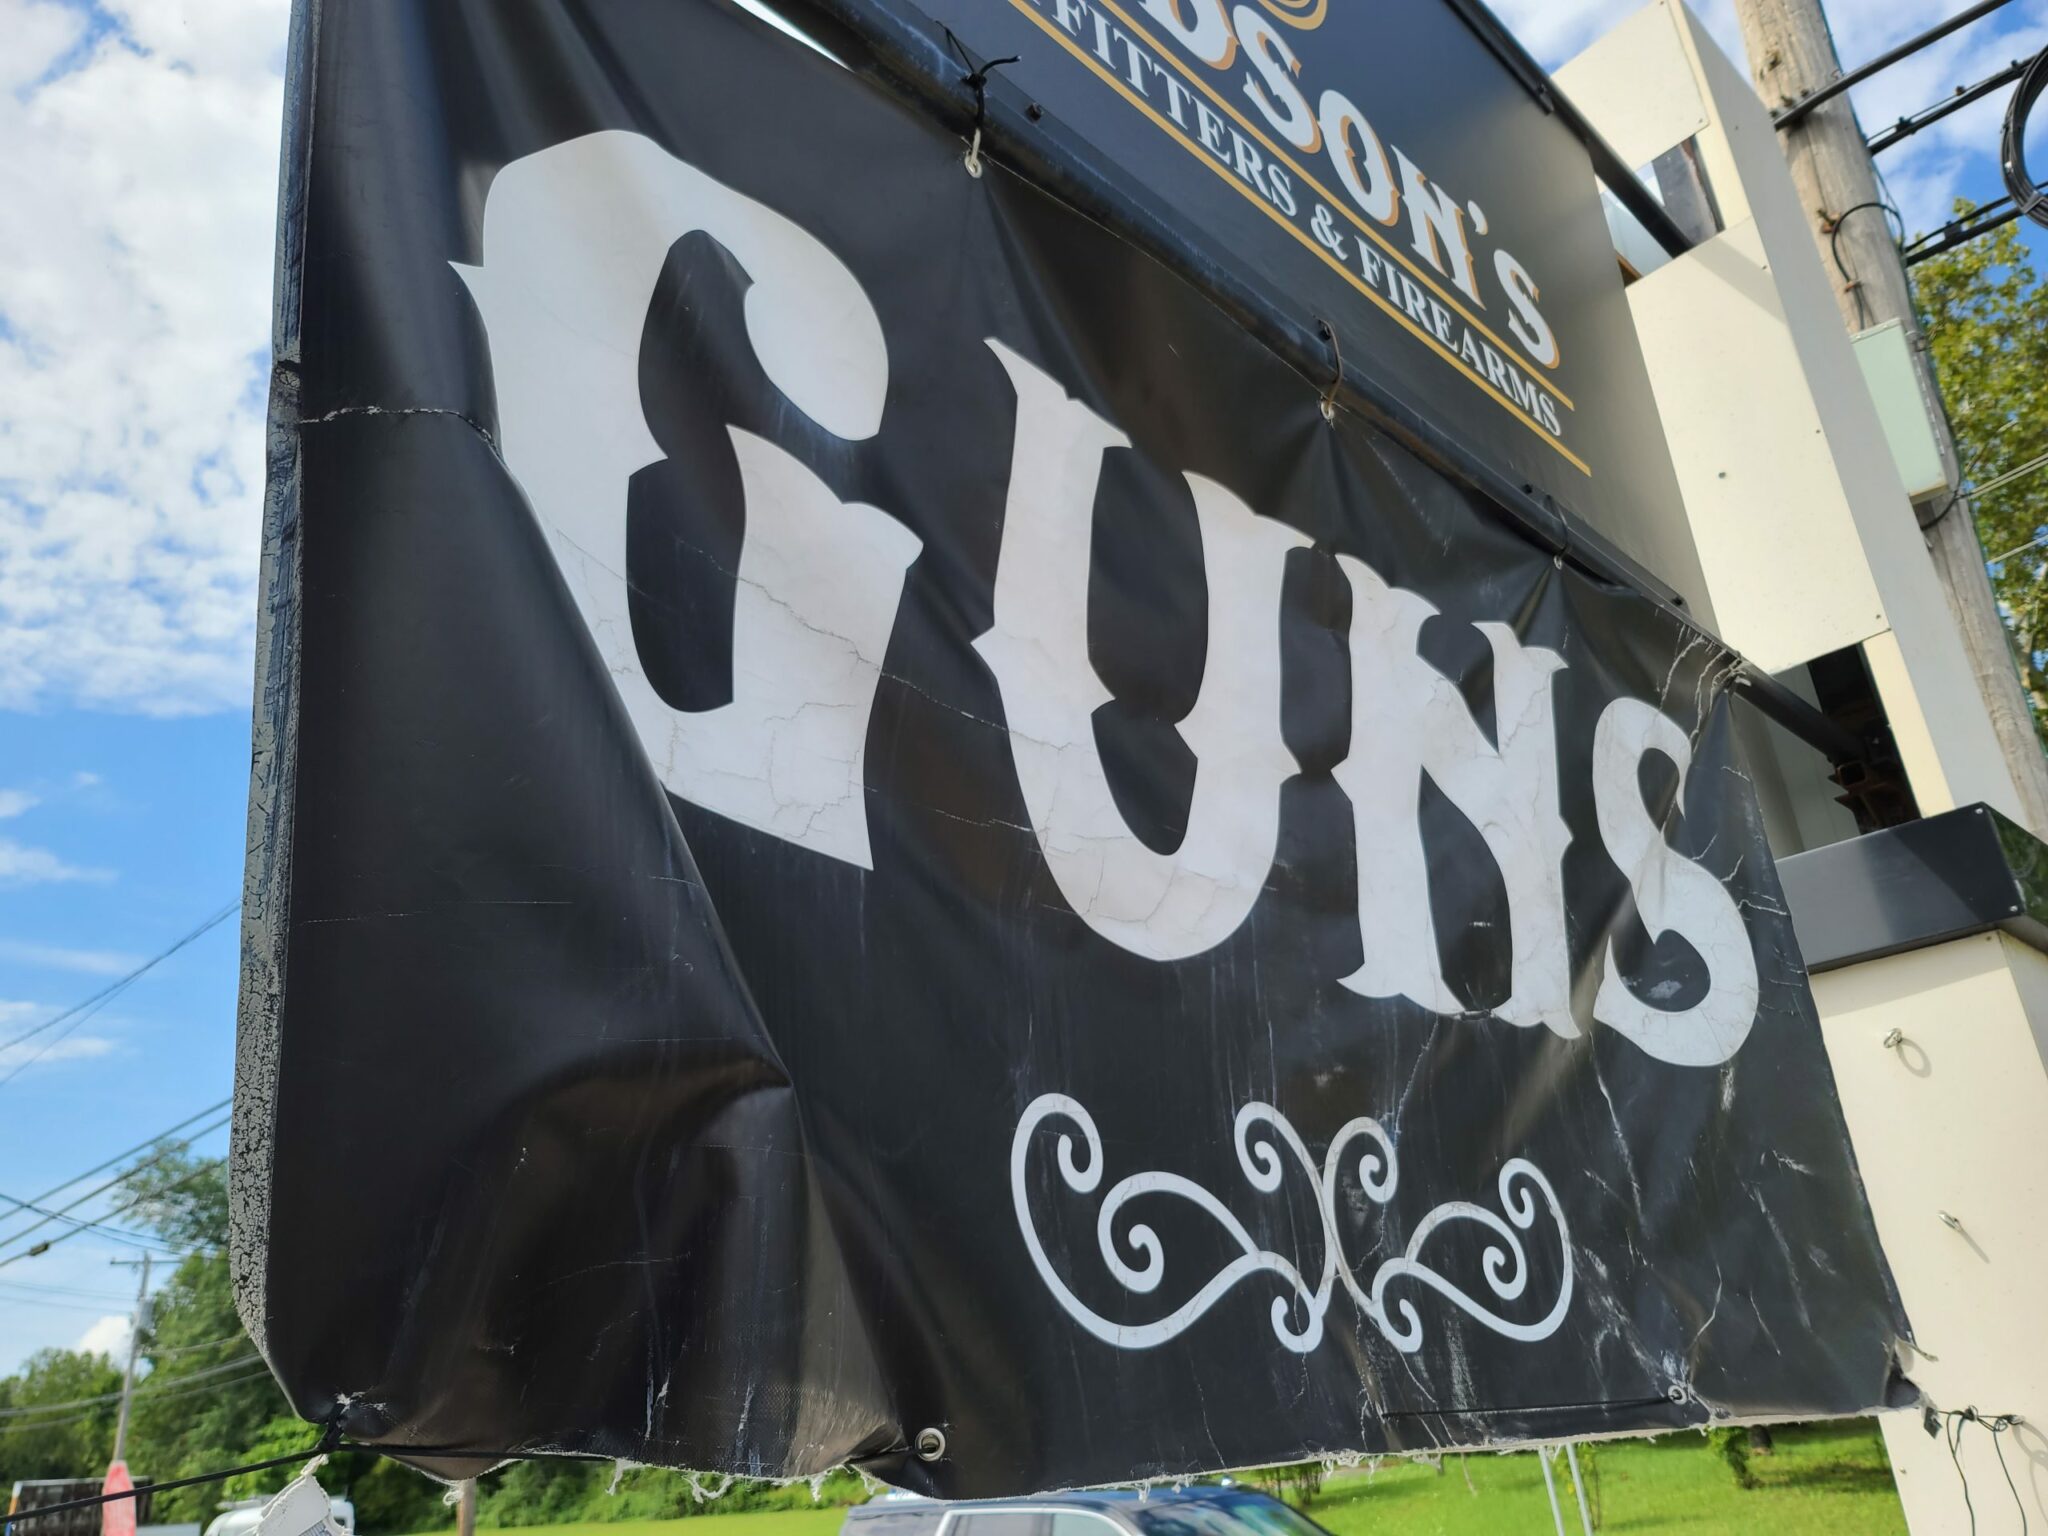 A sign advertising guns outside a store